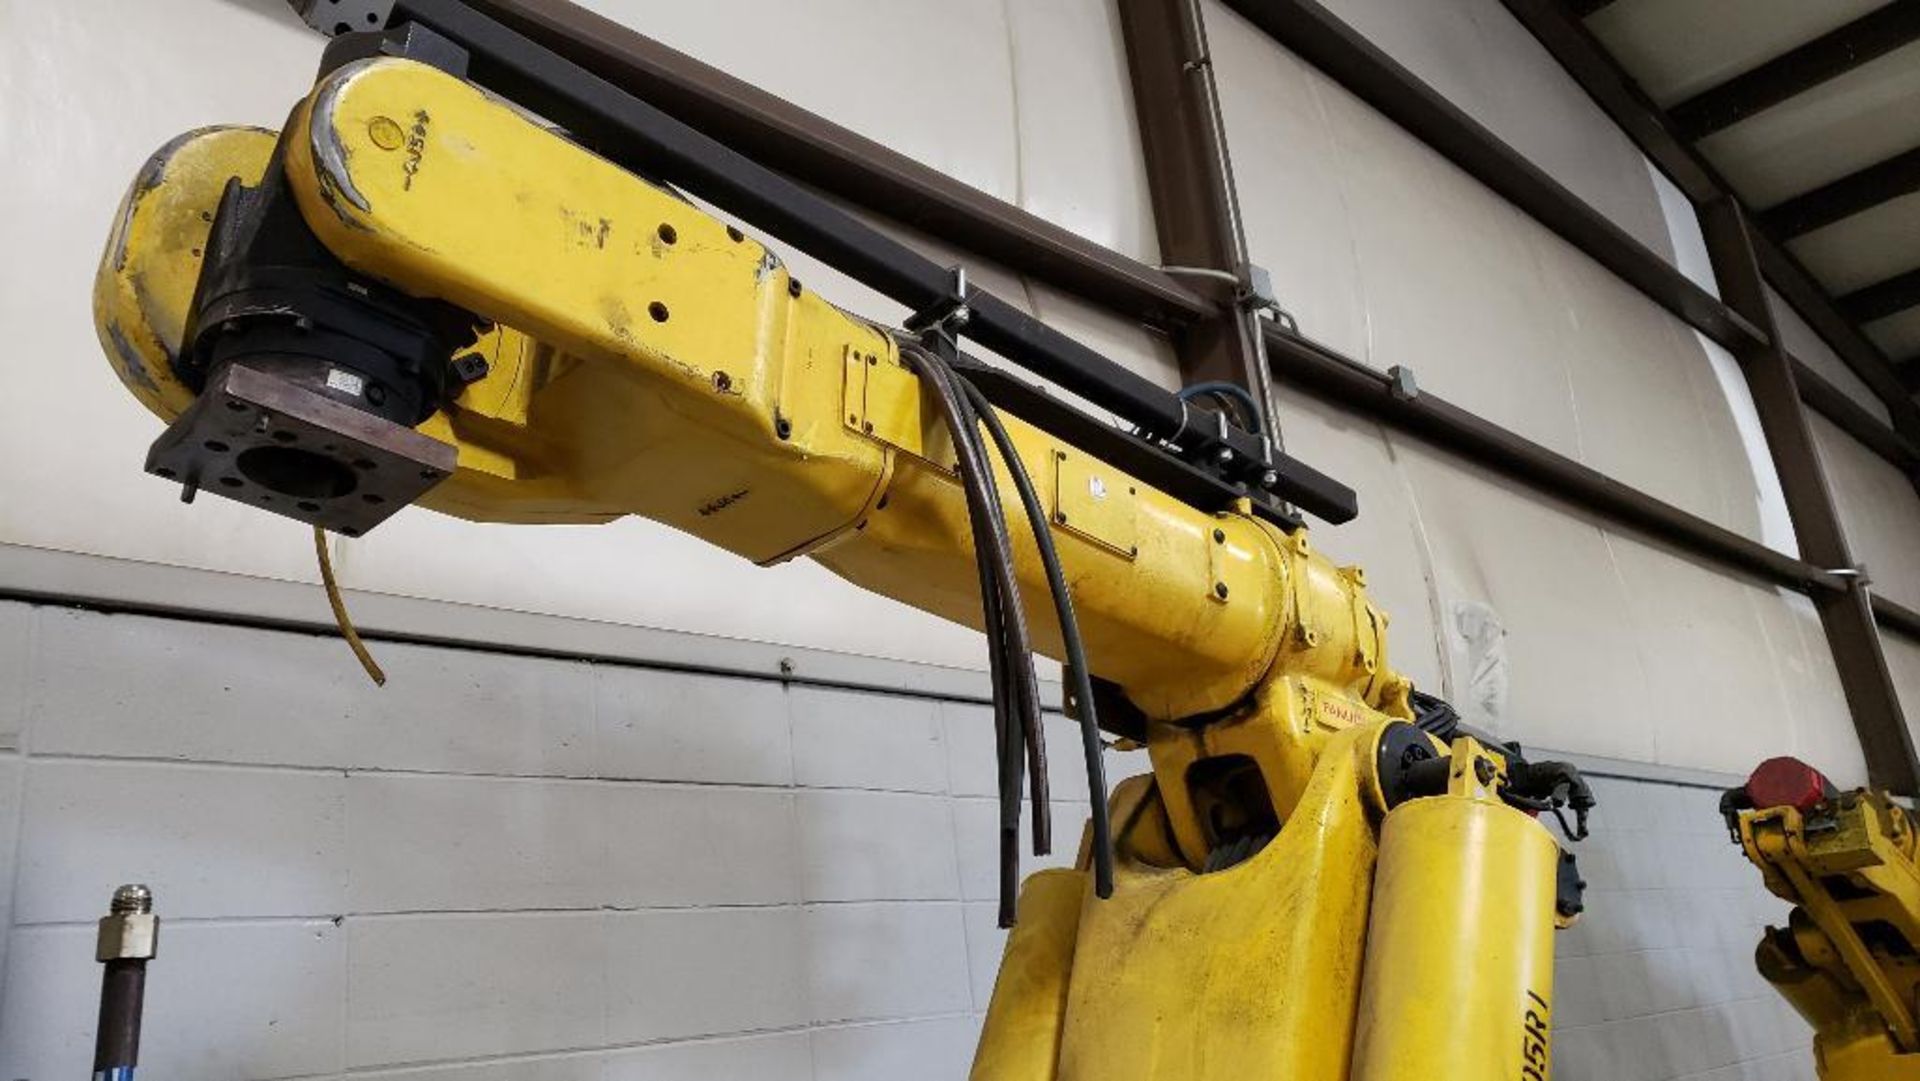 Fanuc S-420iW robot with R-J2 controller. - Image 13 of 14